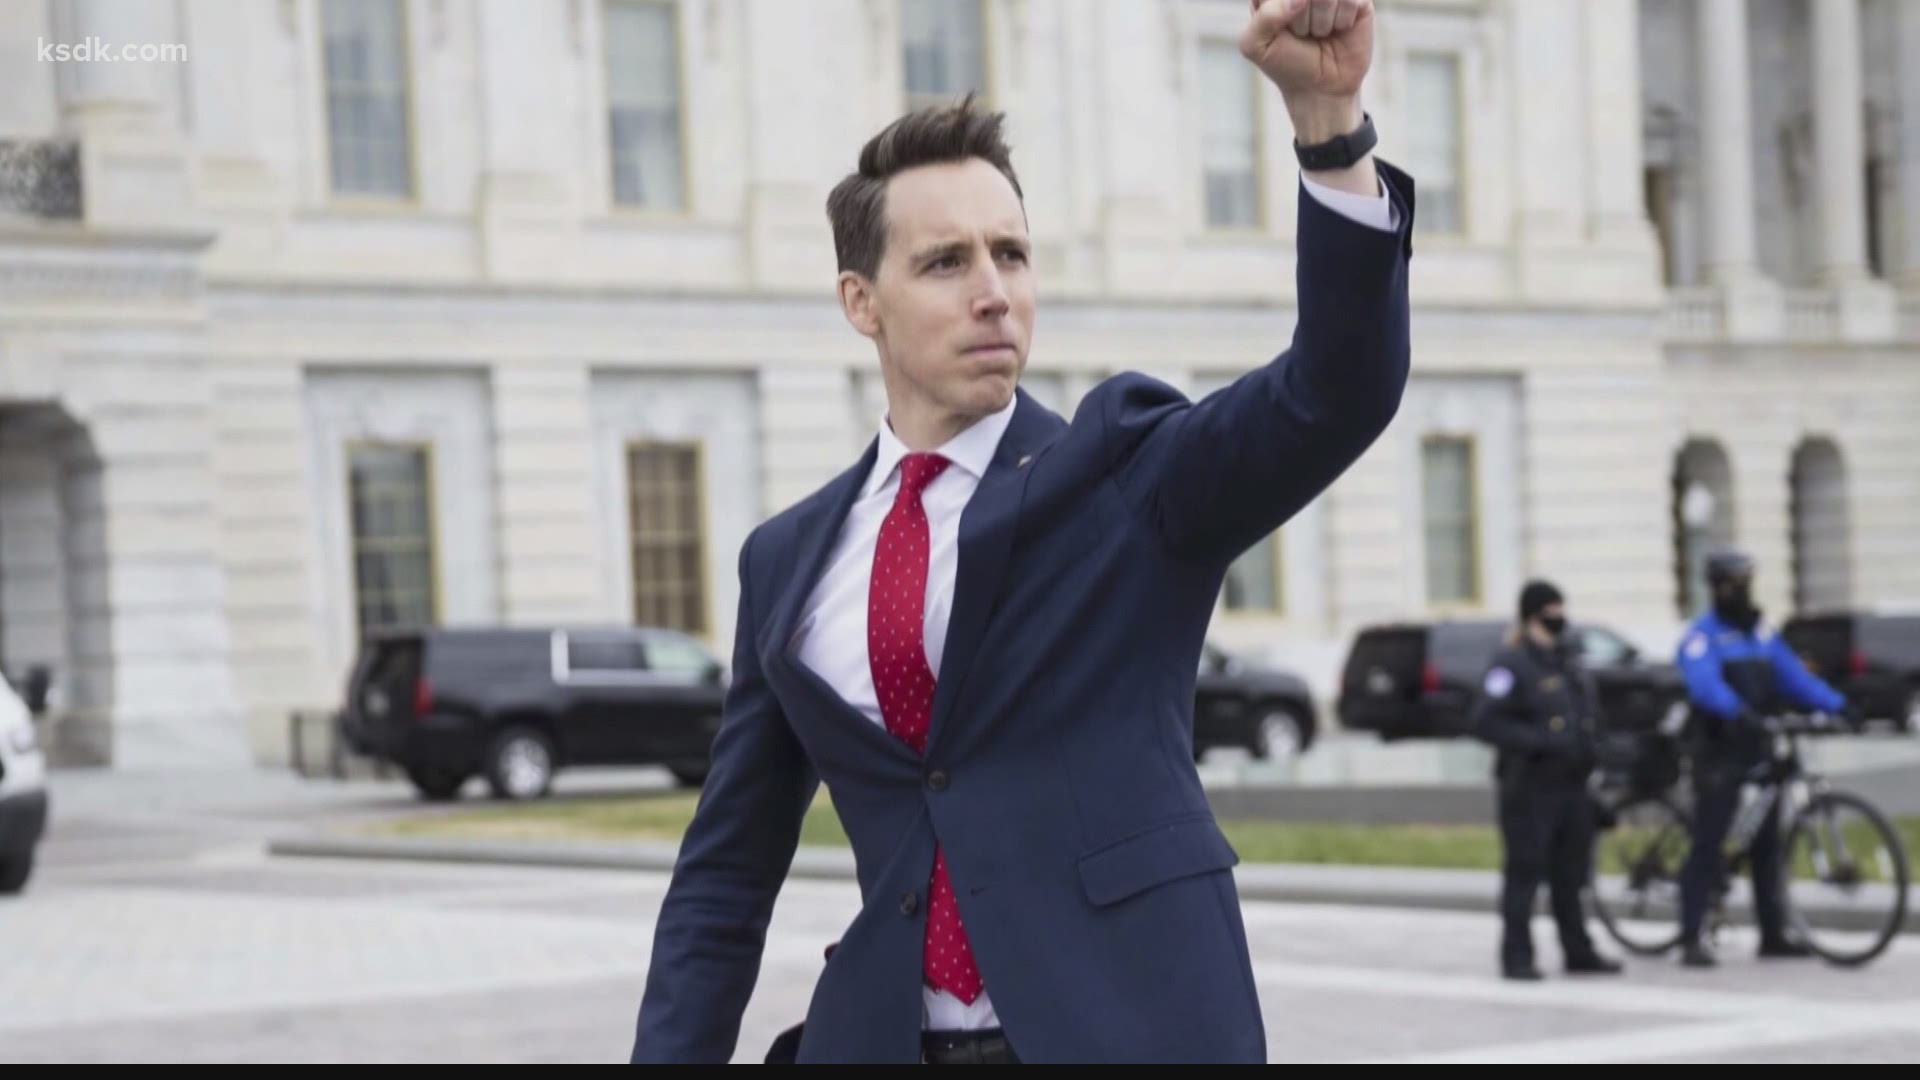 Missouri Senator Josh Hawley made his first public appearance since the violence at the U.S. Capitol on Fox News Monday